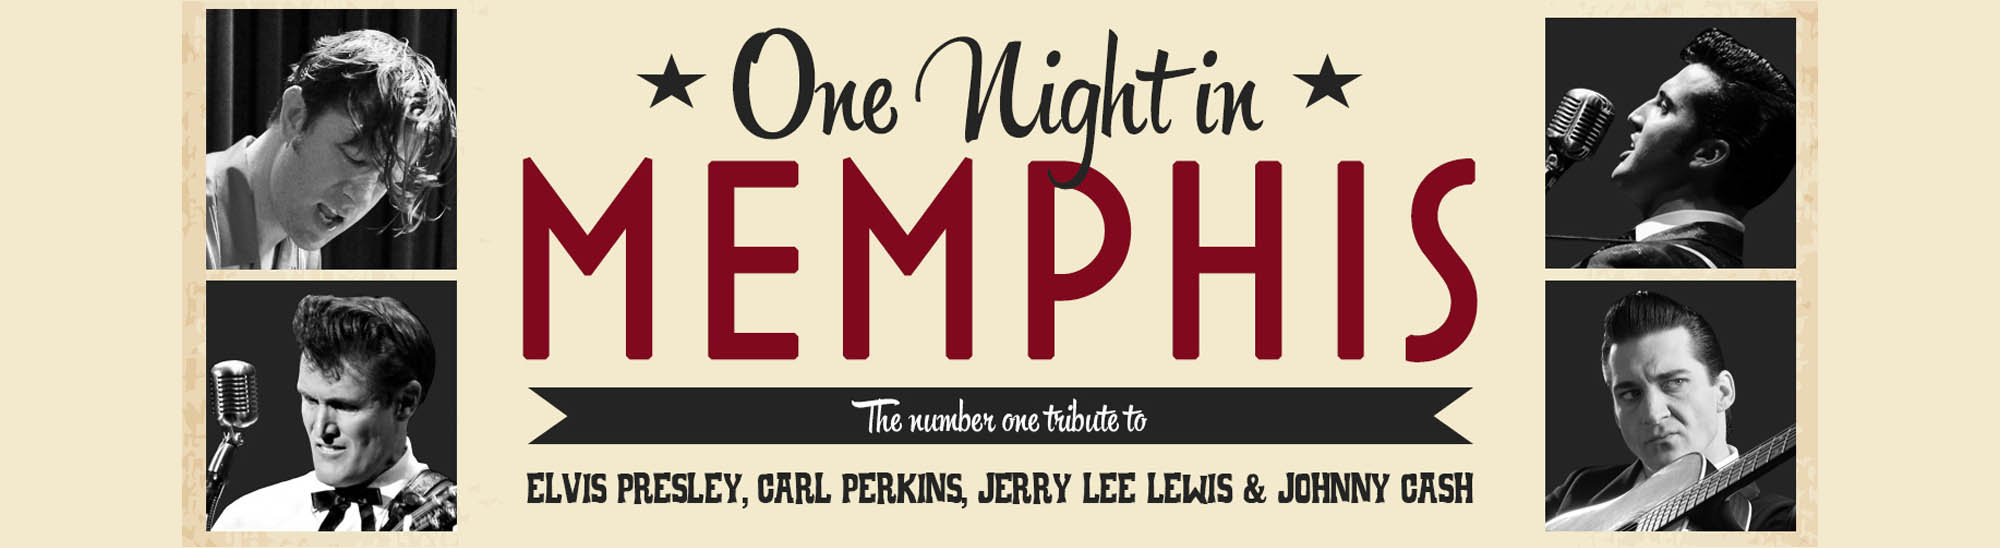 one-night-in-memphis-1-tribute-to-presley-perkins-lewis-cash